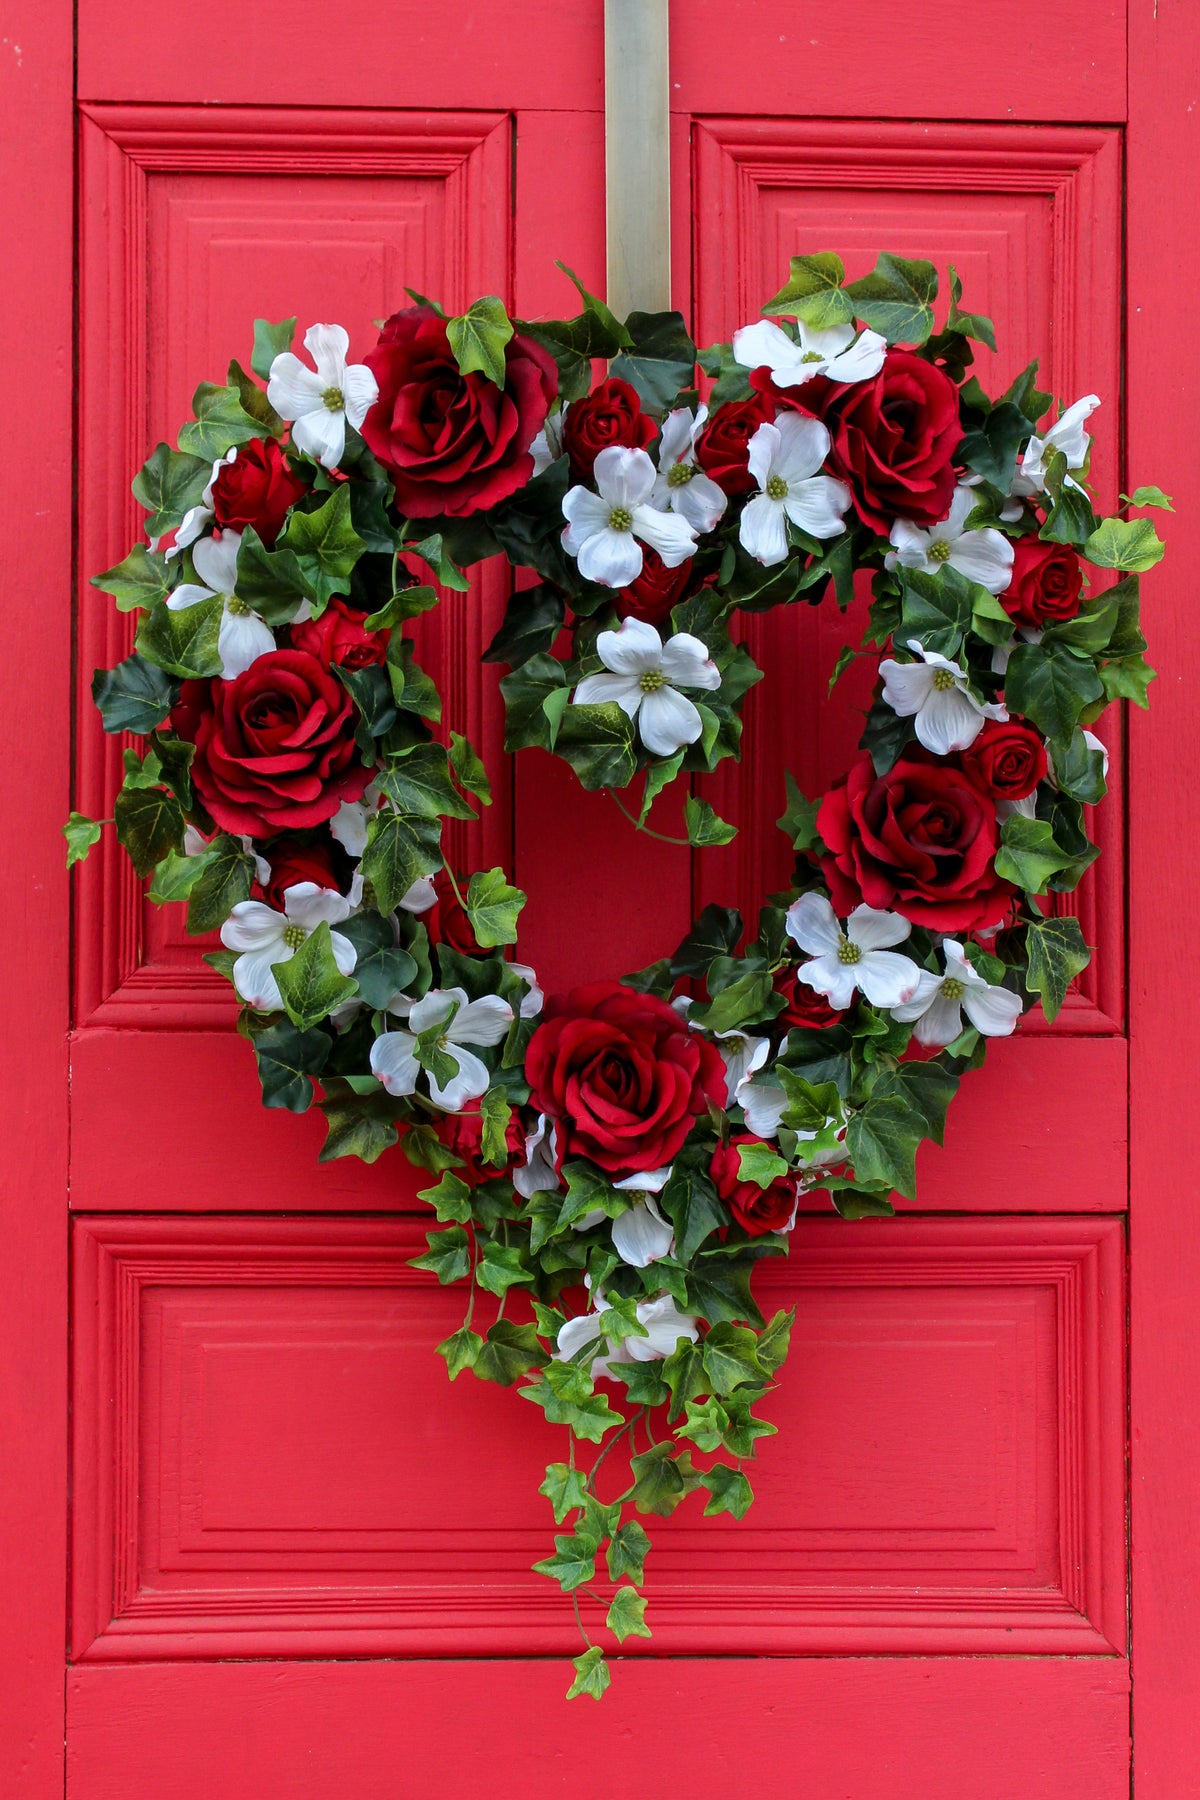 Red Rose, White Dogwood & Ivy Valentine's Heart Wreath – Darby Creek Trading